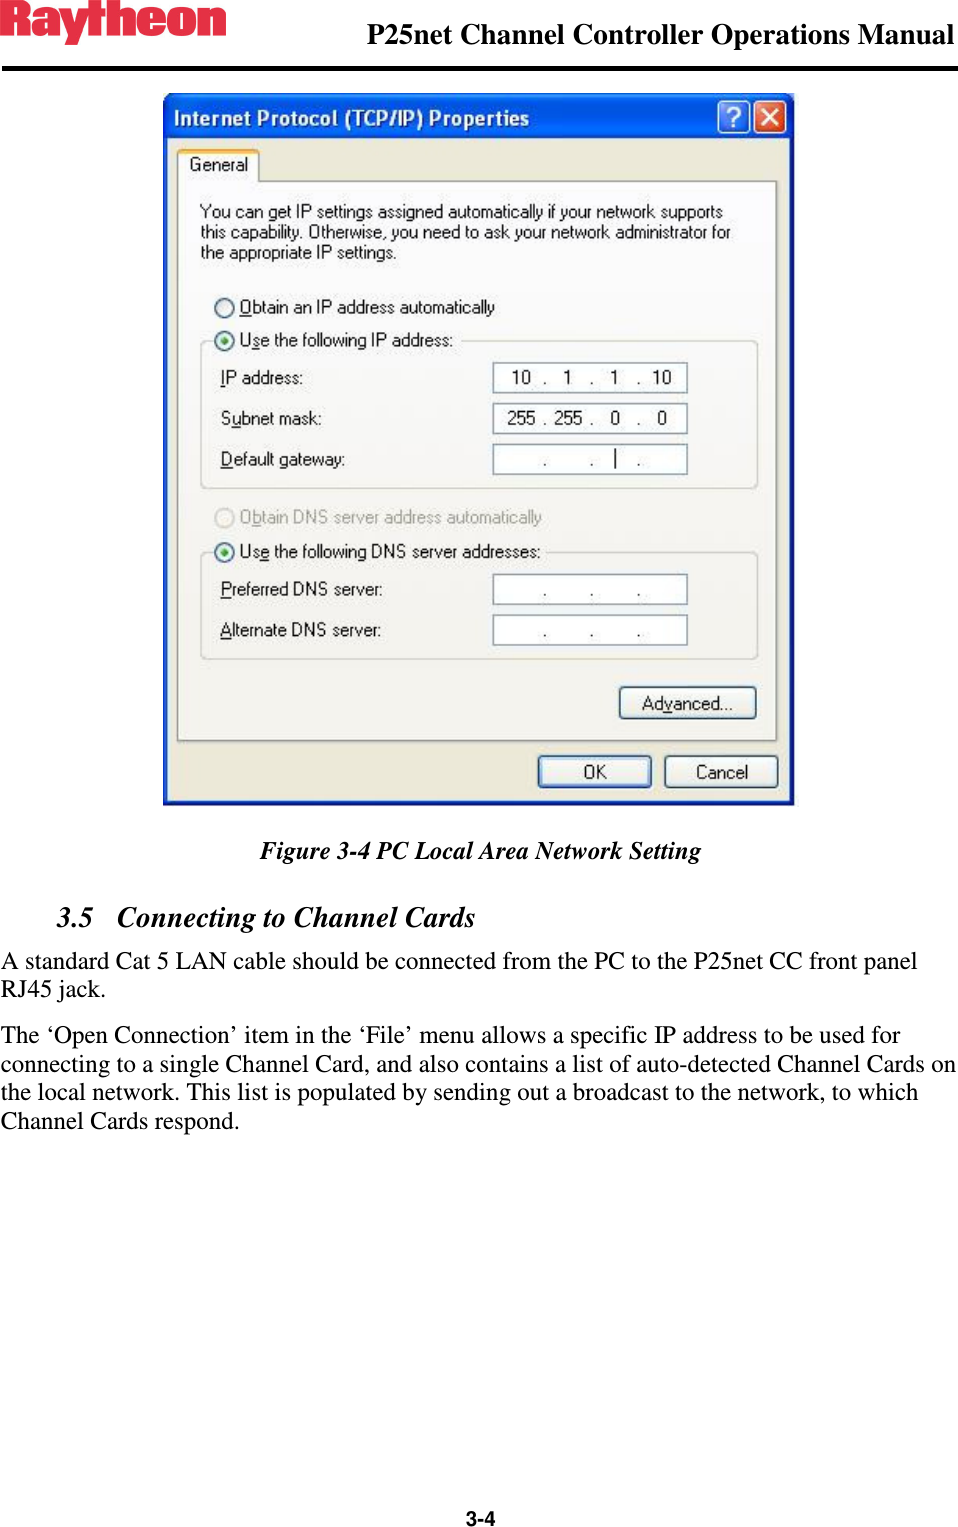                P25net Channel Controller Operations Manual                  3-4   Figure 3-4 PC Local Area Network Setting 3.5 Connecting to Channel Cards A standard Cat 5 LAN cable should be connected from the PC to the P25net CC front panel RJ45 jack. The ‘Open Connection’ item in the ‘File’ menu allows a specific IP address to be used for connecting to a single Channel Card, and also contains a list of auto-detected Channel Cards on the local network. This list is populated by sending out a broadcast to the network, to which Channel Cards respond. 